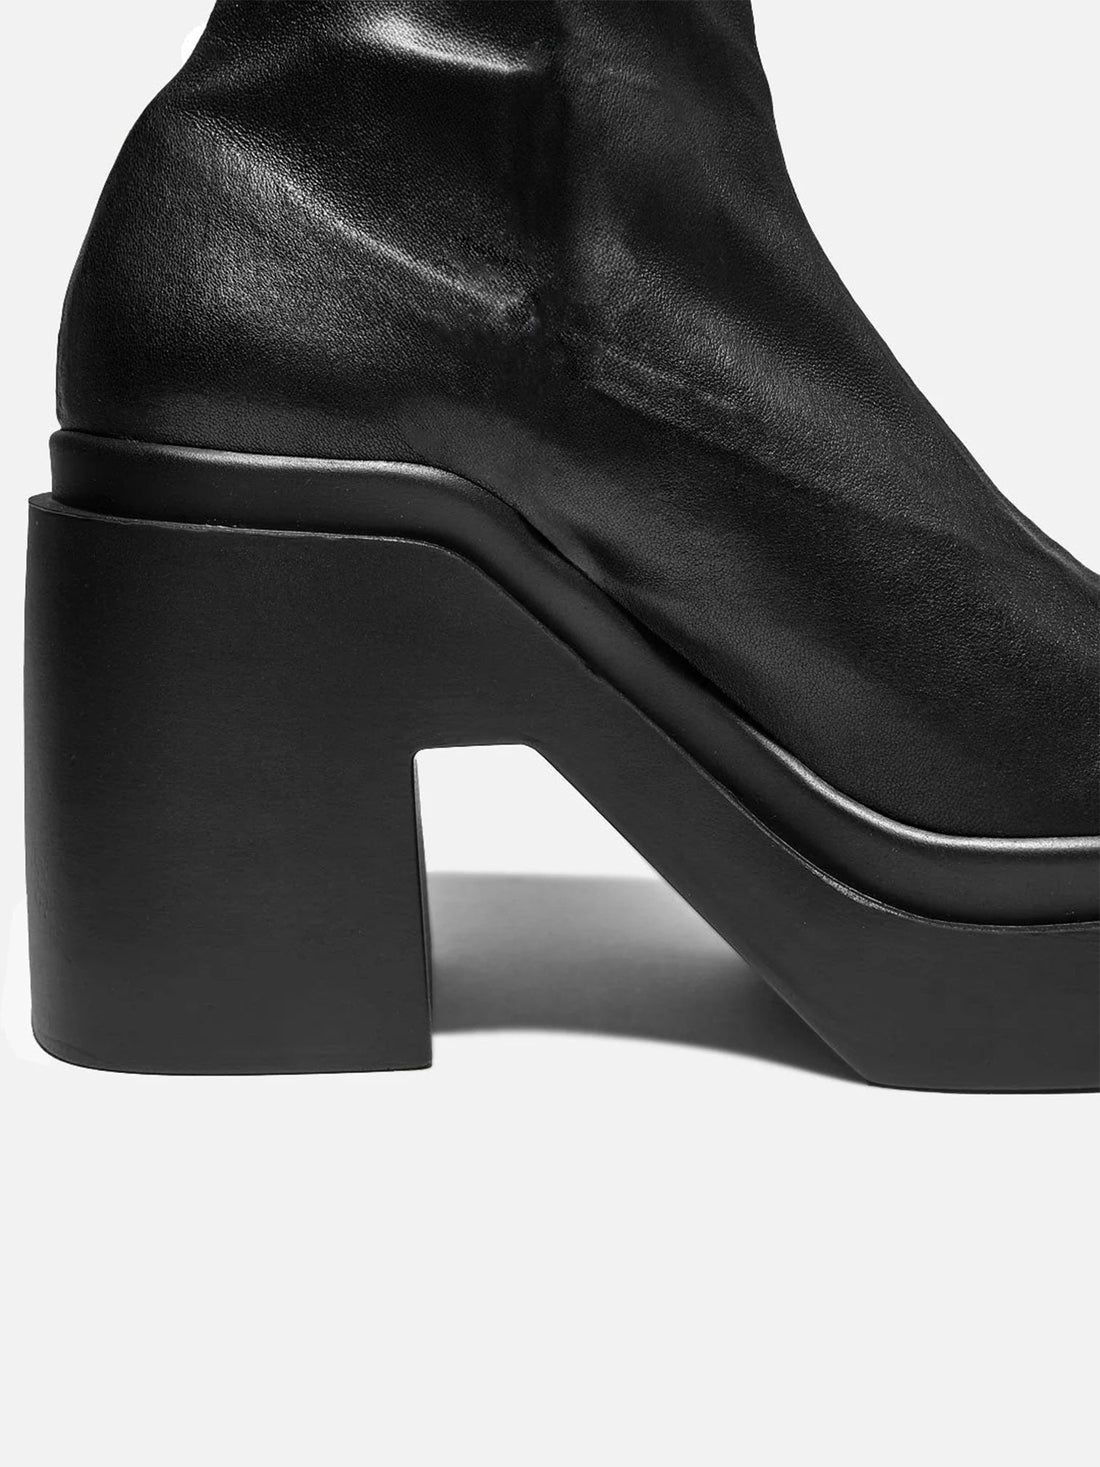 NINA ankle boots, leather black